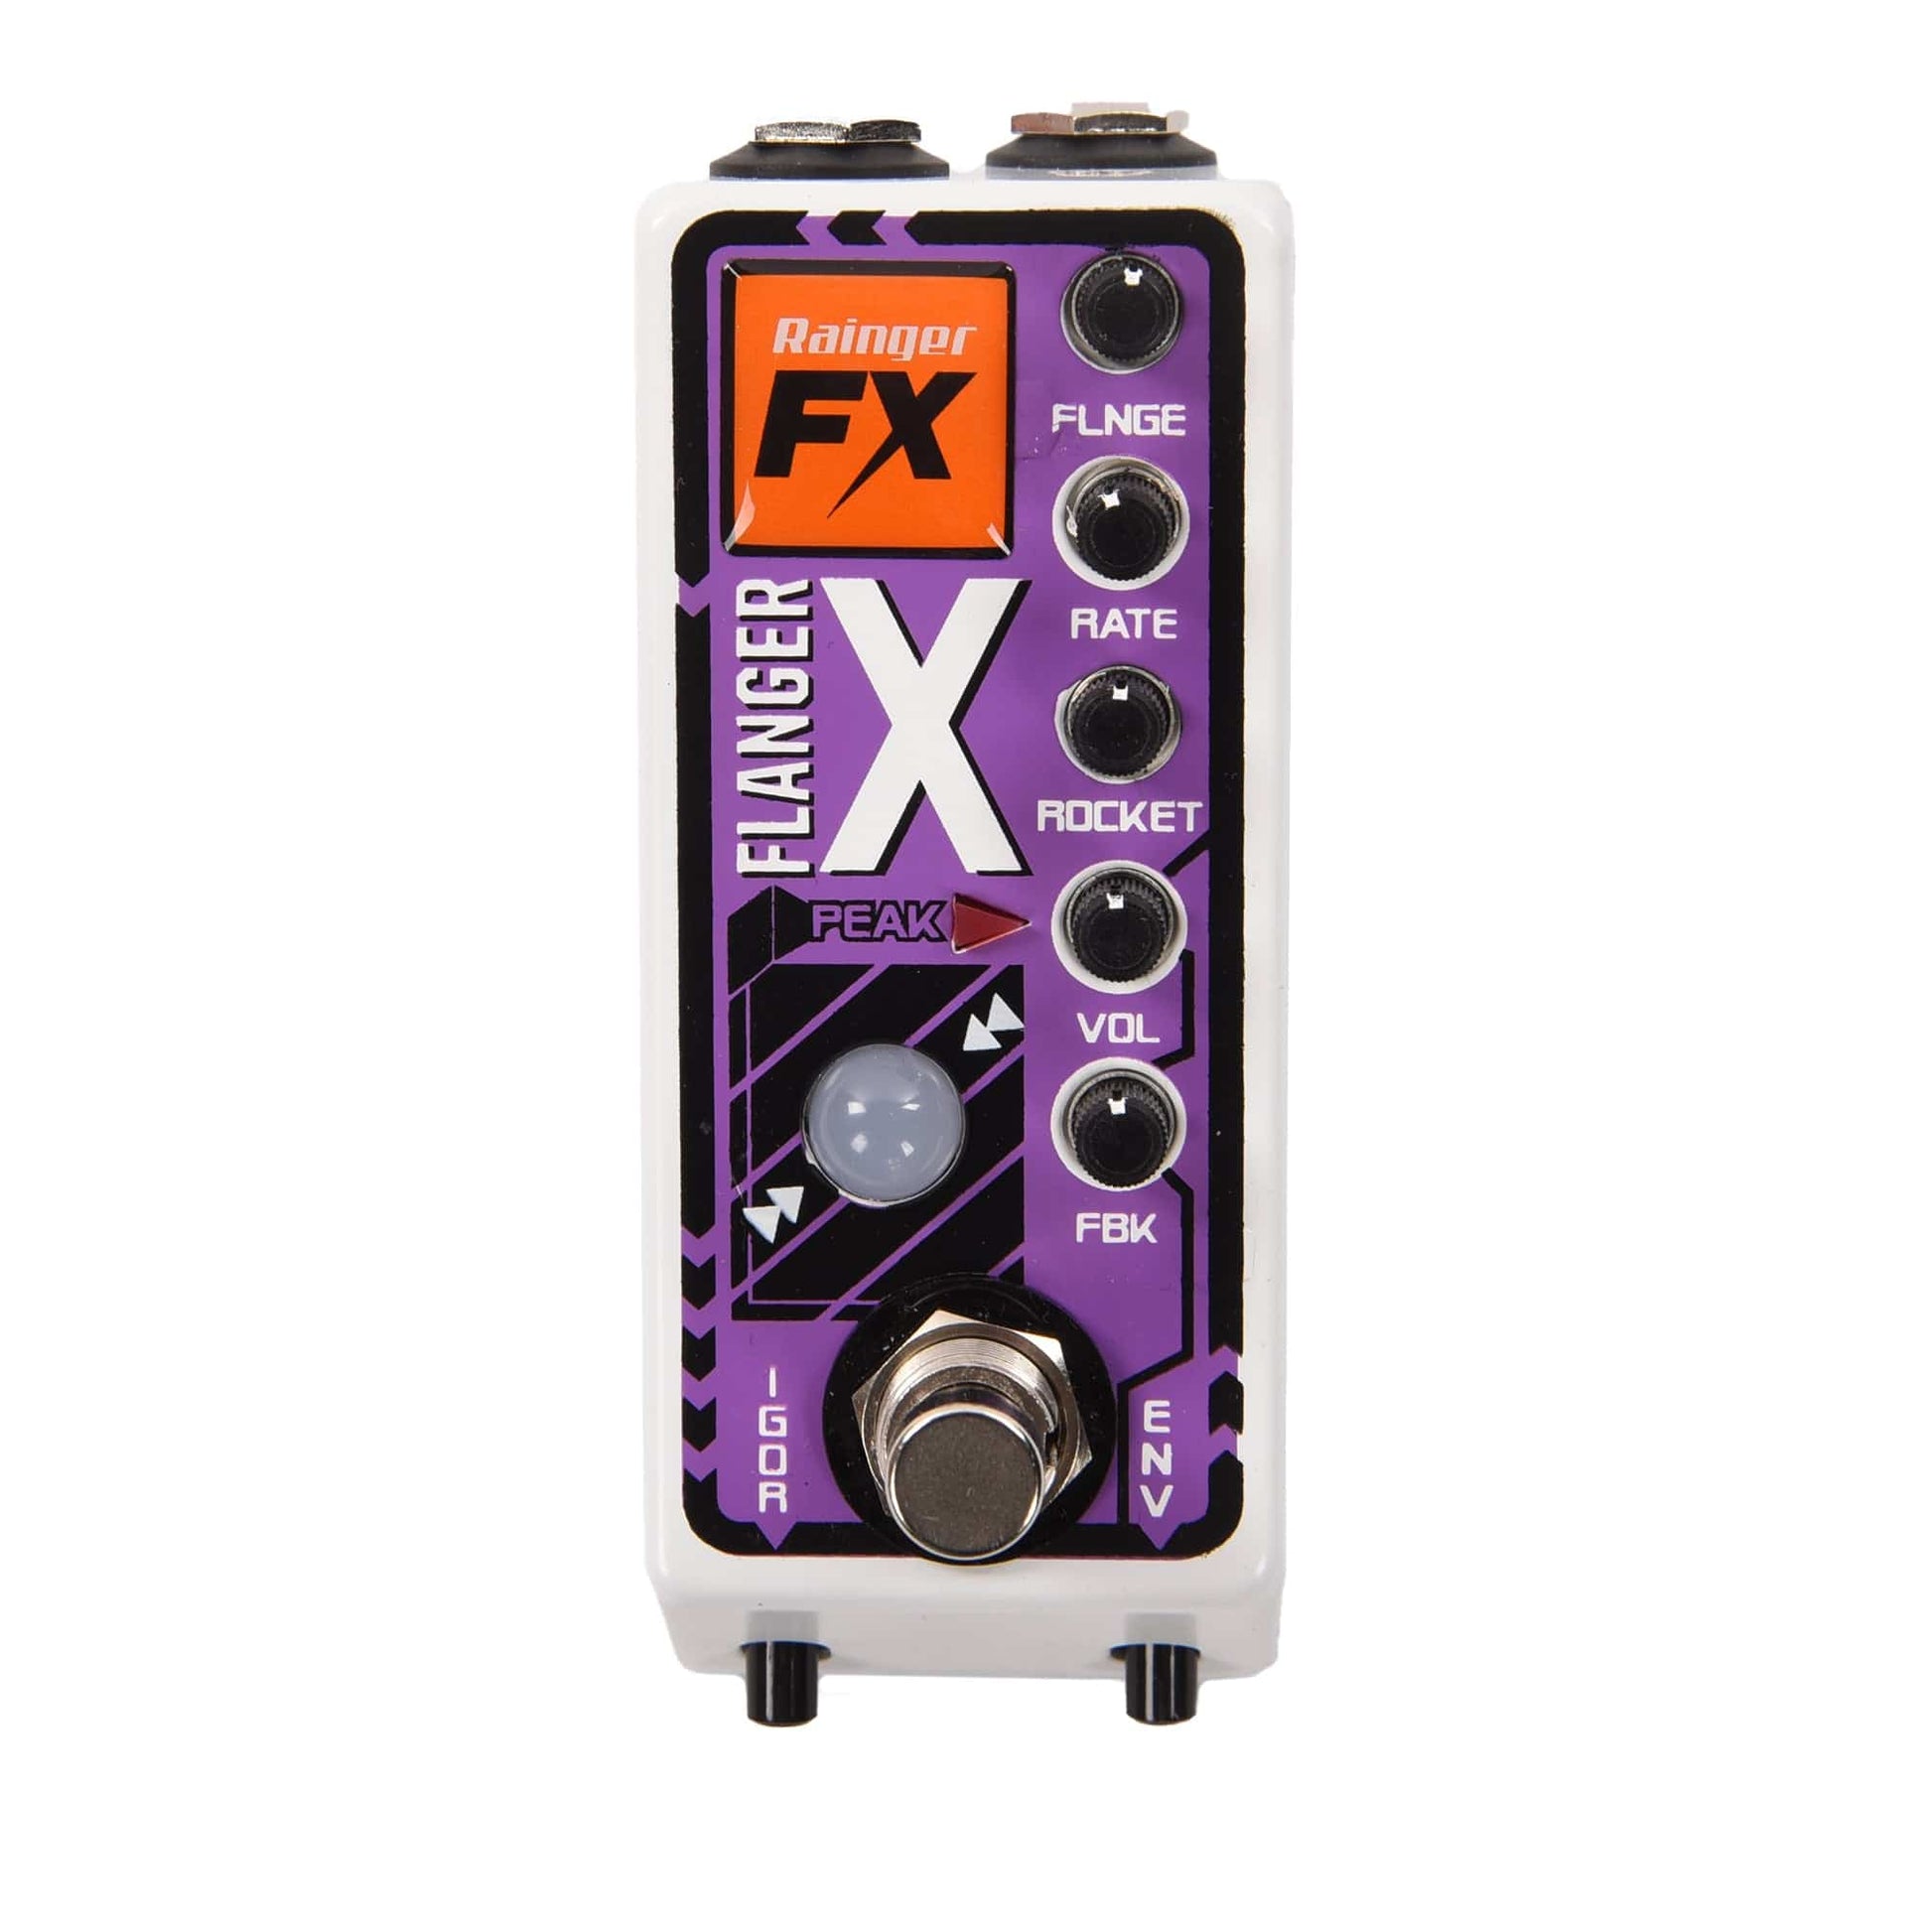 Rainger FX Flanger-X Pedal Effects and Pedals / Flanger